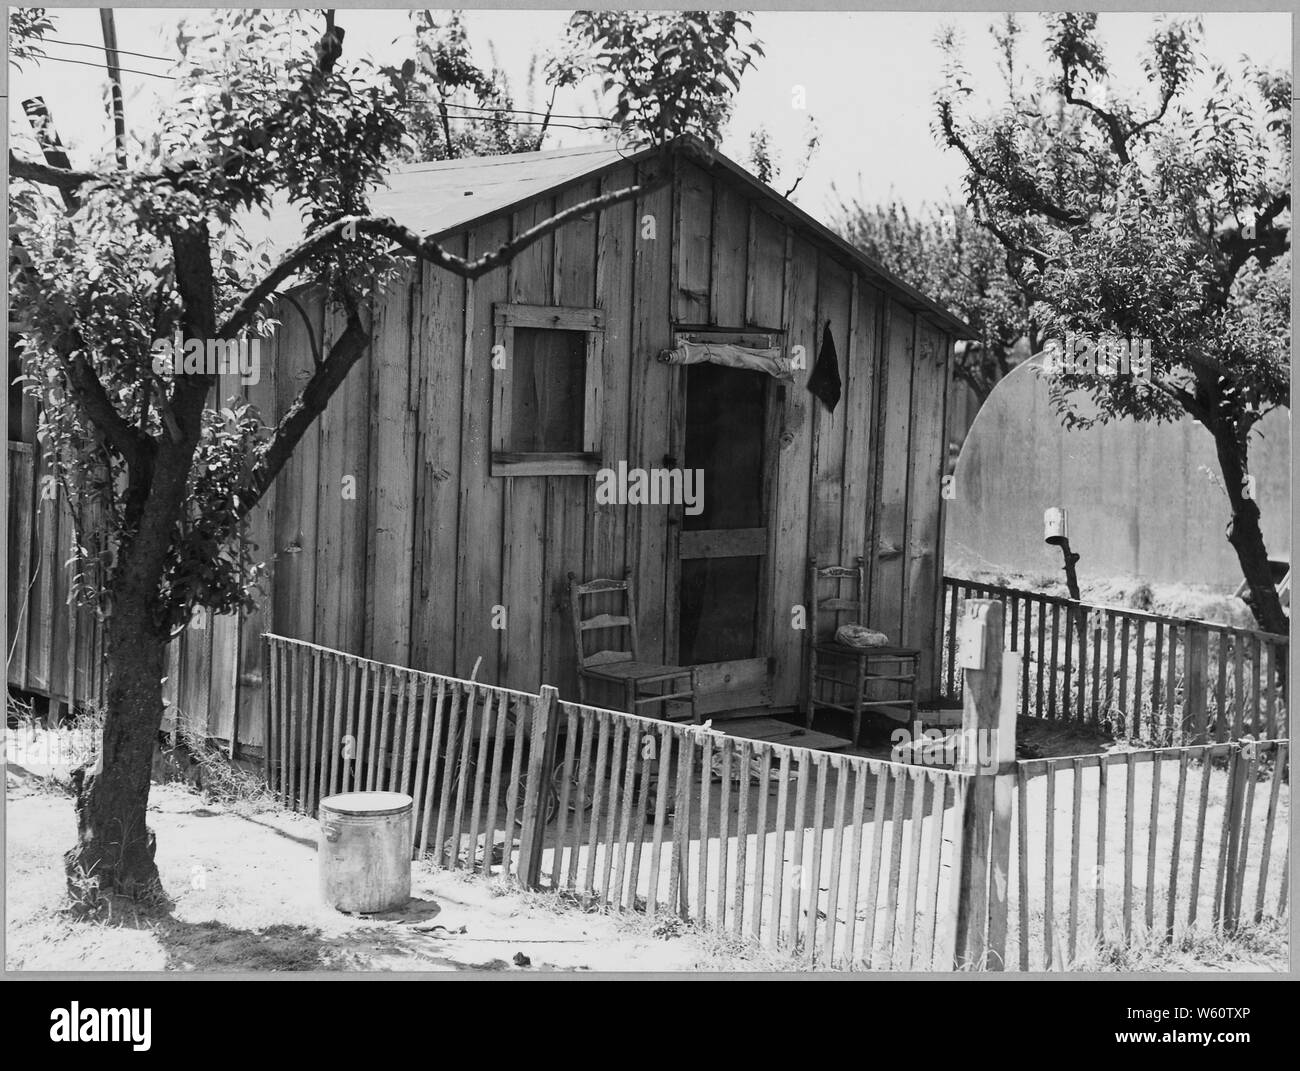 Arvin, Kern County, California. One in a community of shacks in subdivided orchard rented to agricul . . .; Scope and content:  Full caption reads as follows: Arvin, Kern County, California. One in a community of shacks in subdivided orchard rented to agricultural workers as permanent homes. Workers on and off relief. Shacks rent from $7 to $12 a month. No running water. Stock Photo